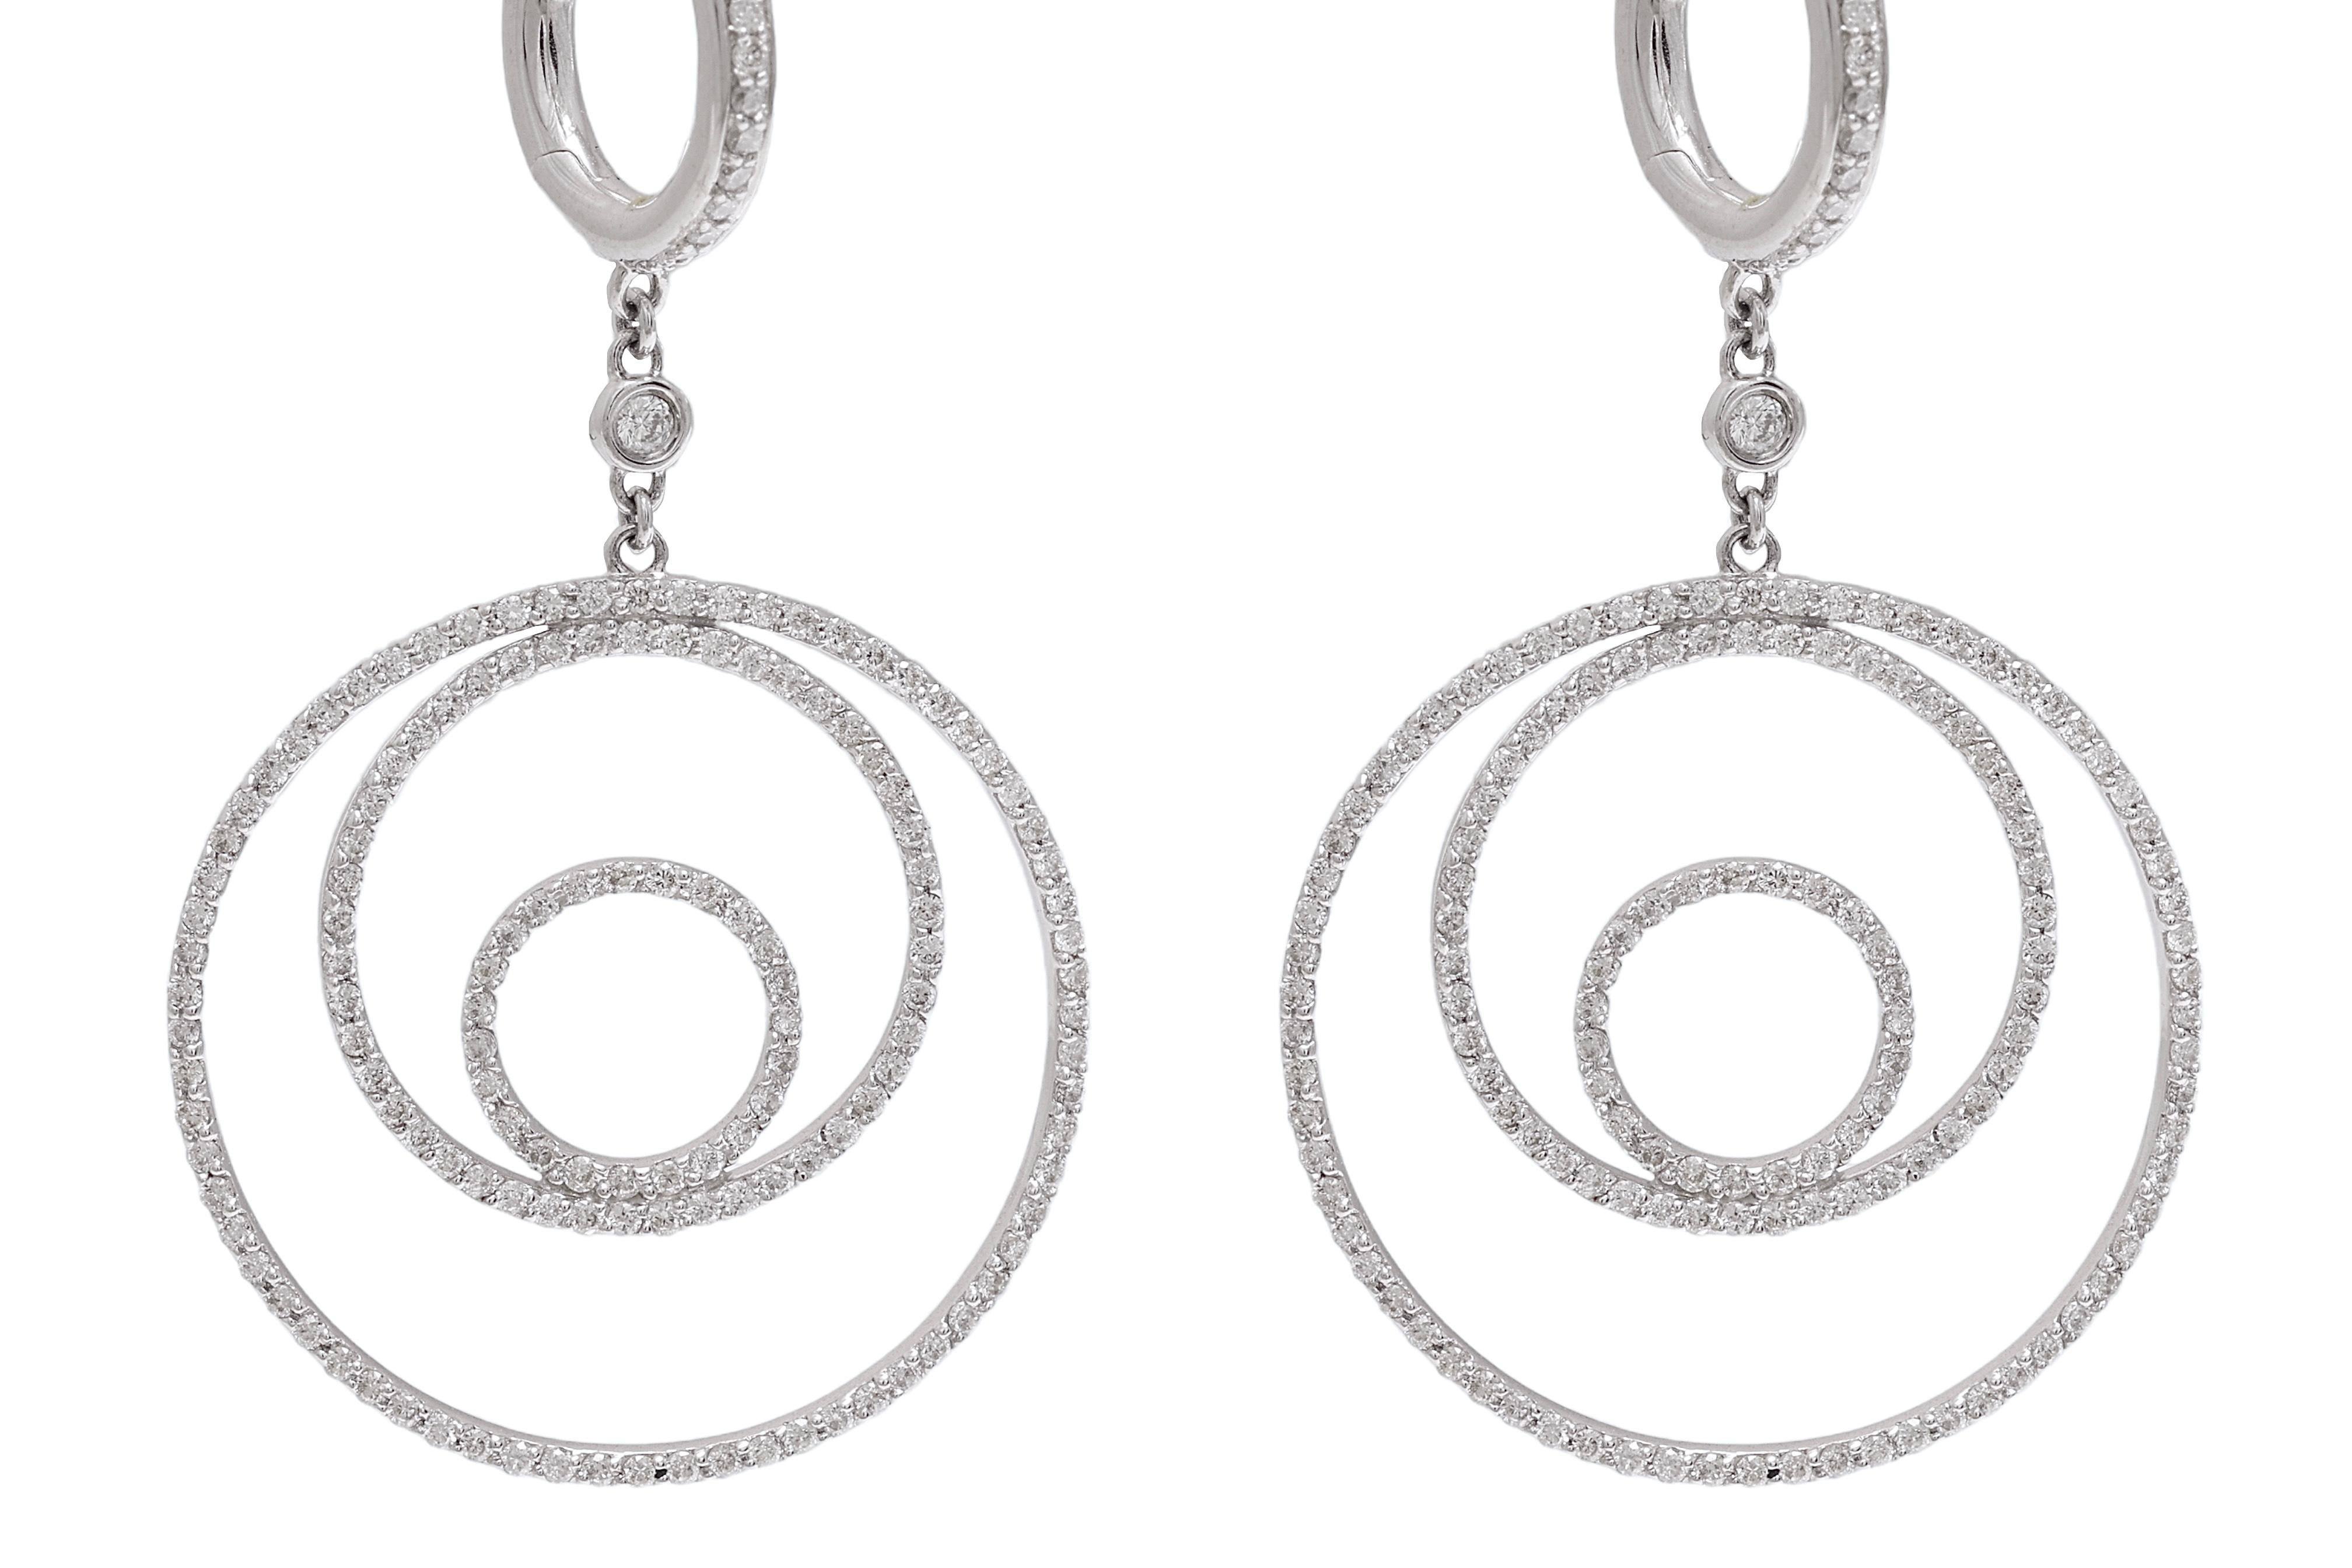 Stunning Classic 18 kt. White Gold Tipple Circle 1.68 ct. Diamond Earrings.

Diamonds: Brilliant cut diamond together 1.68 ct.

Material: 18 kt. white gold 

Measurements: 27.4 mm x 48.5 mm 

Total weight: 10.2 gram / 0.360 oz / 6.6 dwt 